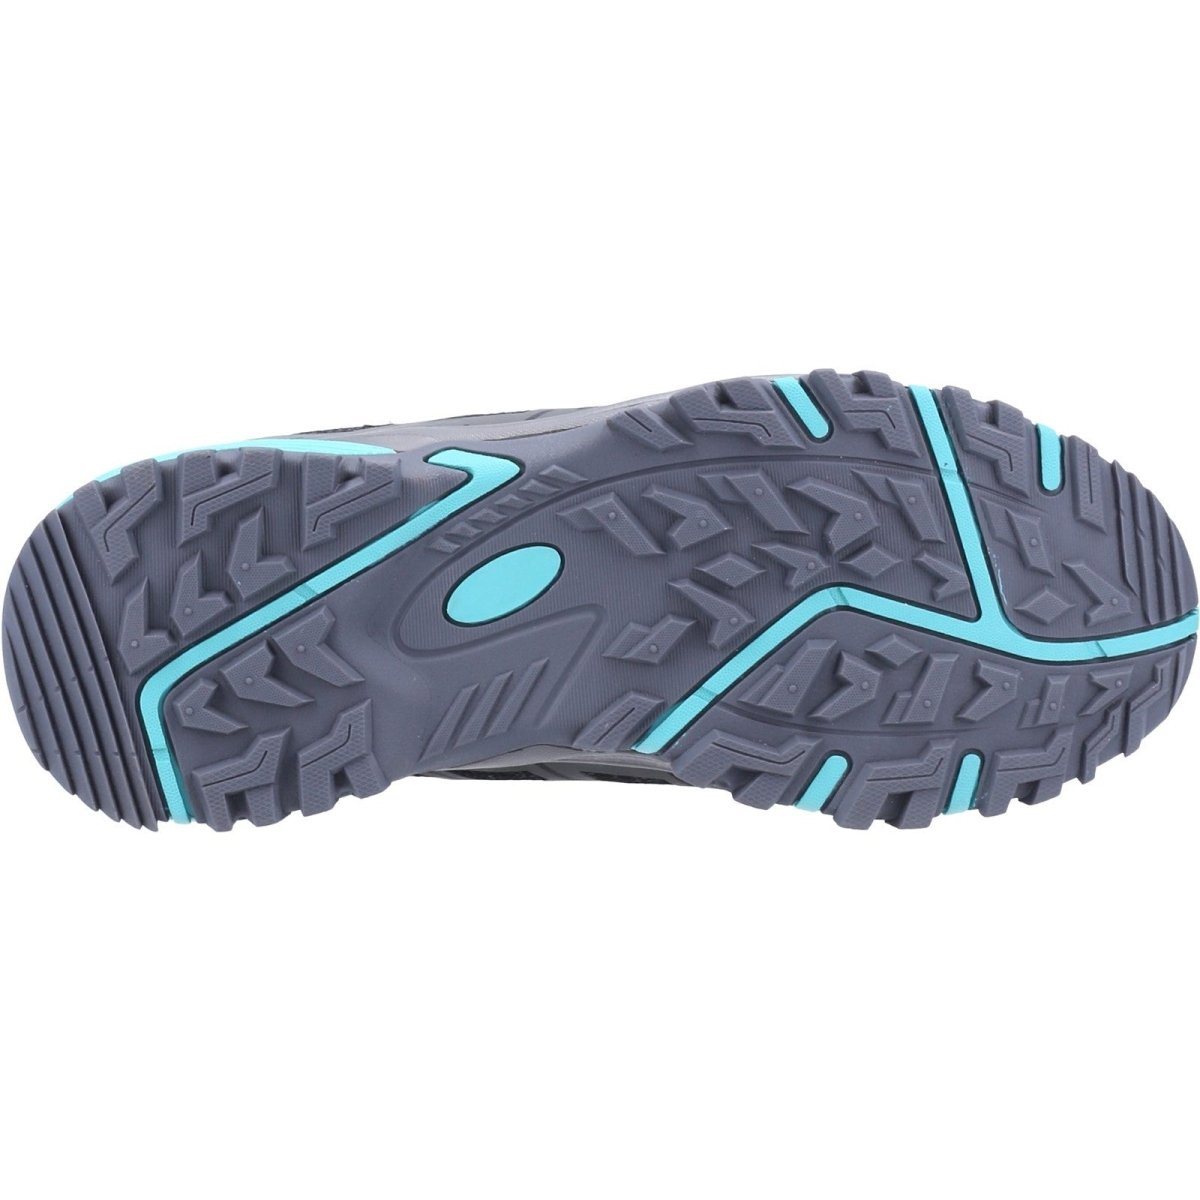 Cotswold Wychwood Low Ladies Waterproof Hiking Shoes - Shoe Store Direct